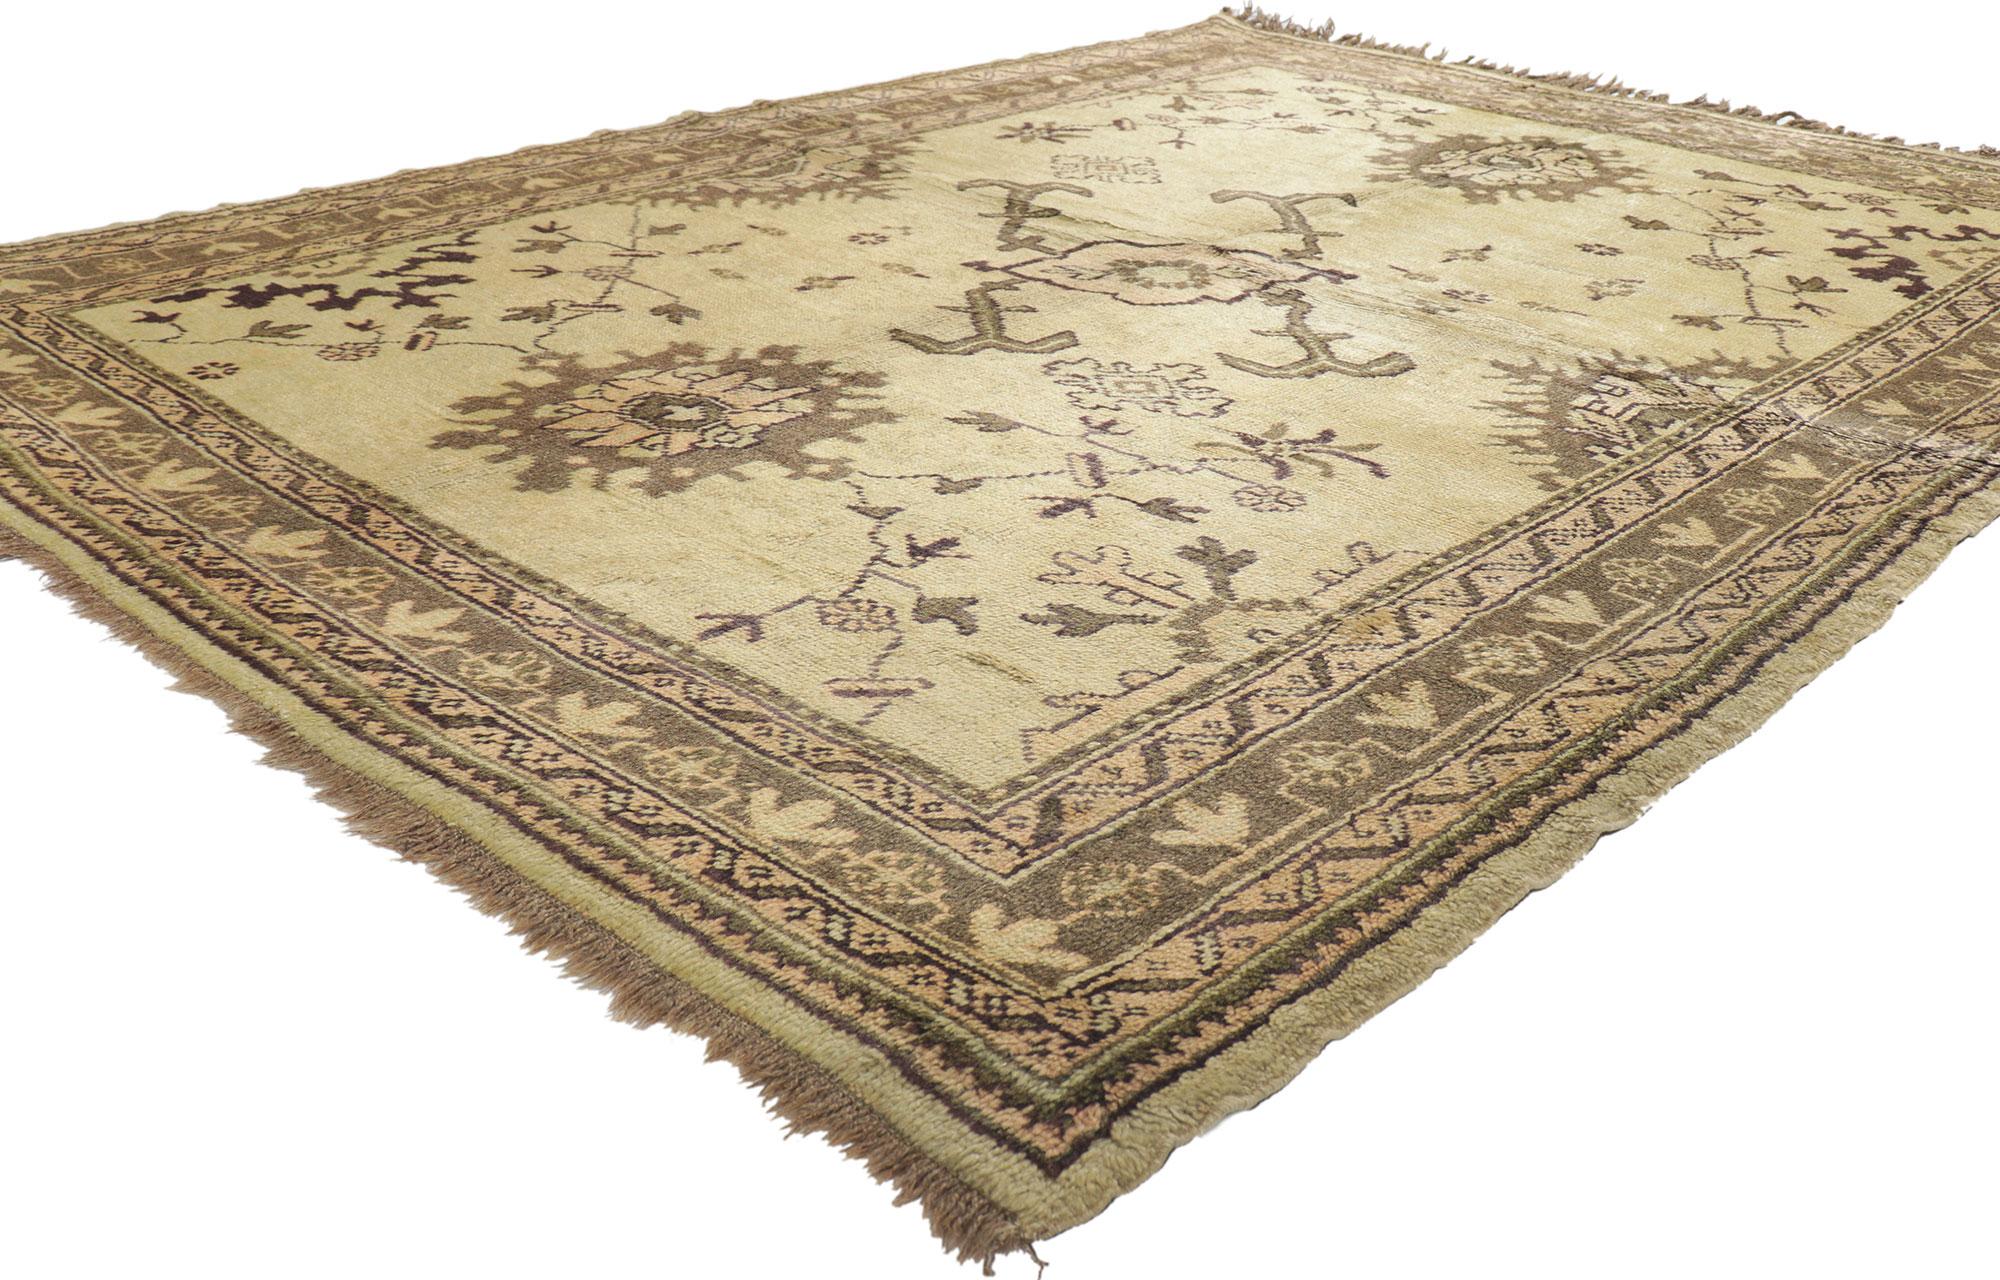 50925 Vintage Turkish Oushak Rug, 05'08 x 07'10. Antique-washed Turkish Oushak rugs that have neutral earth-tone colors undergo a specialized process to achieve a subtle, aged appearance resembling antique patina. This technique gently softens the